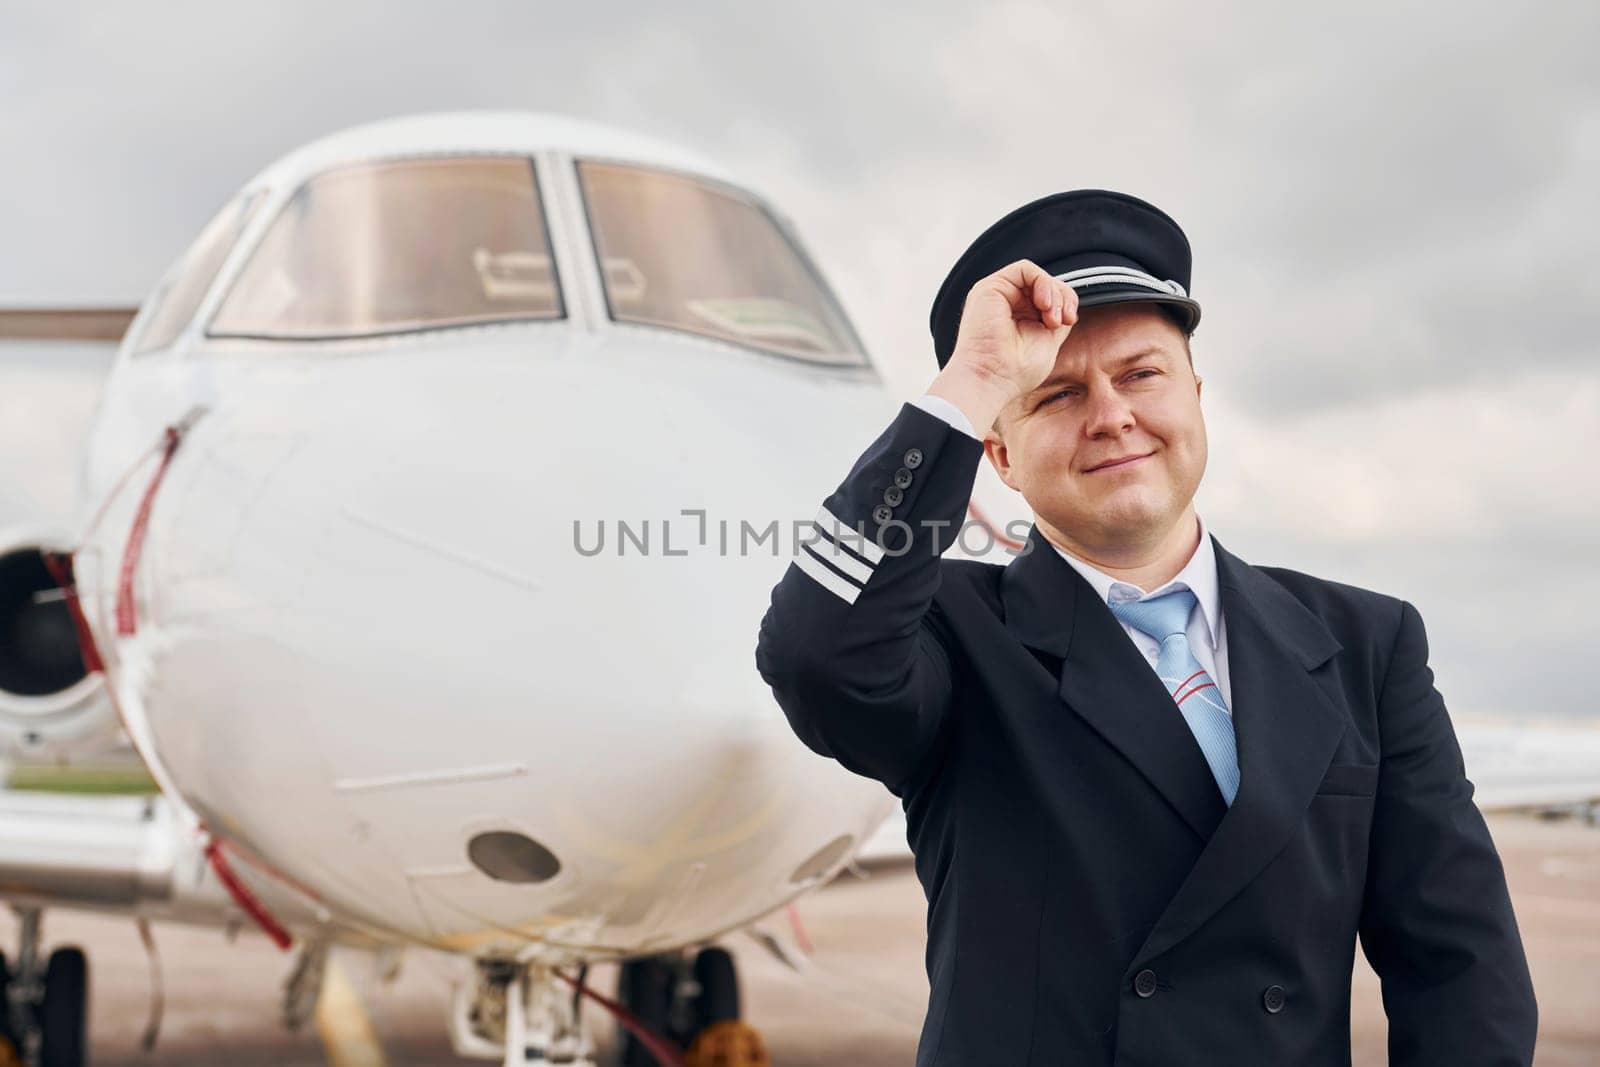 Experienced pilot in uniform standing outside near plane by Standret